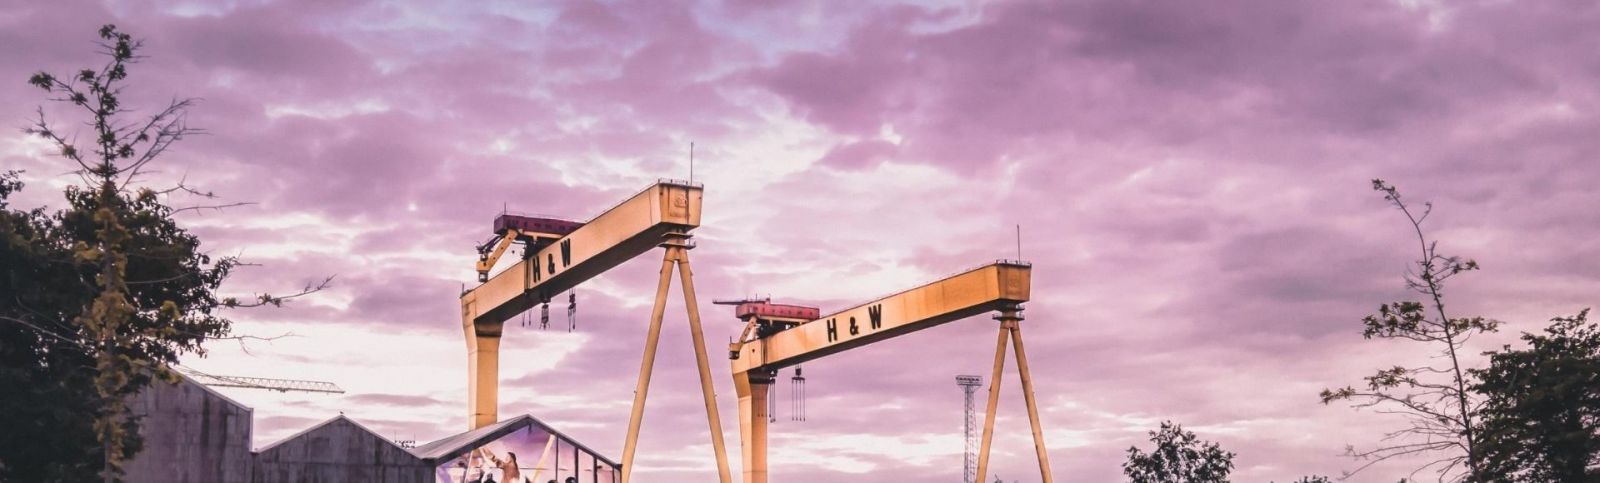 The Harland and Wolffe yellow cranes with an atmospheric purple sky in the background